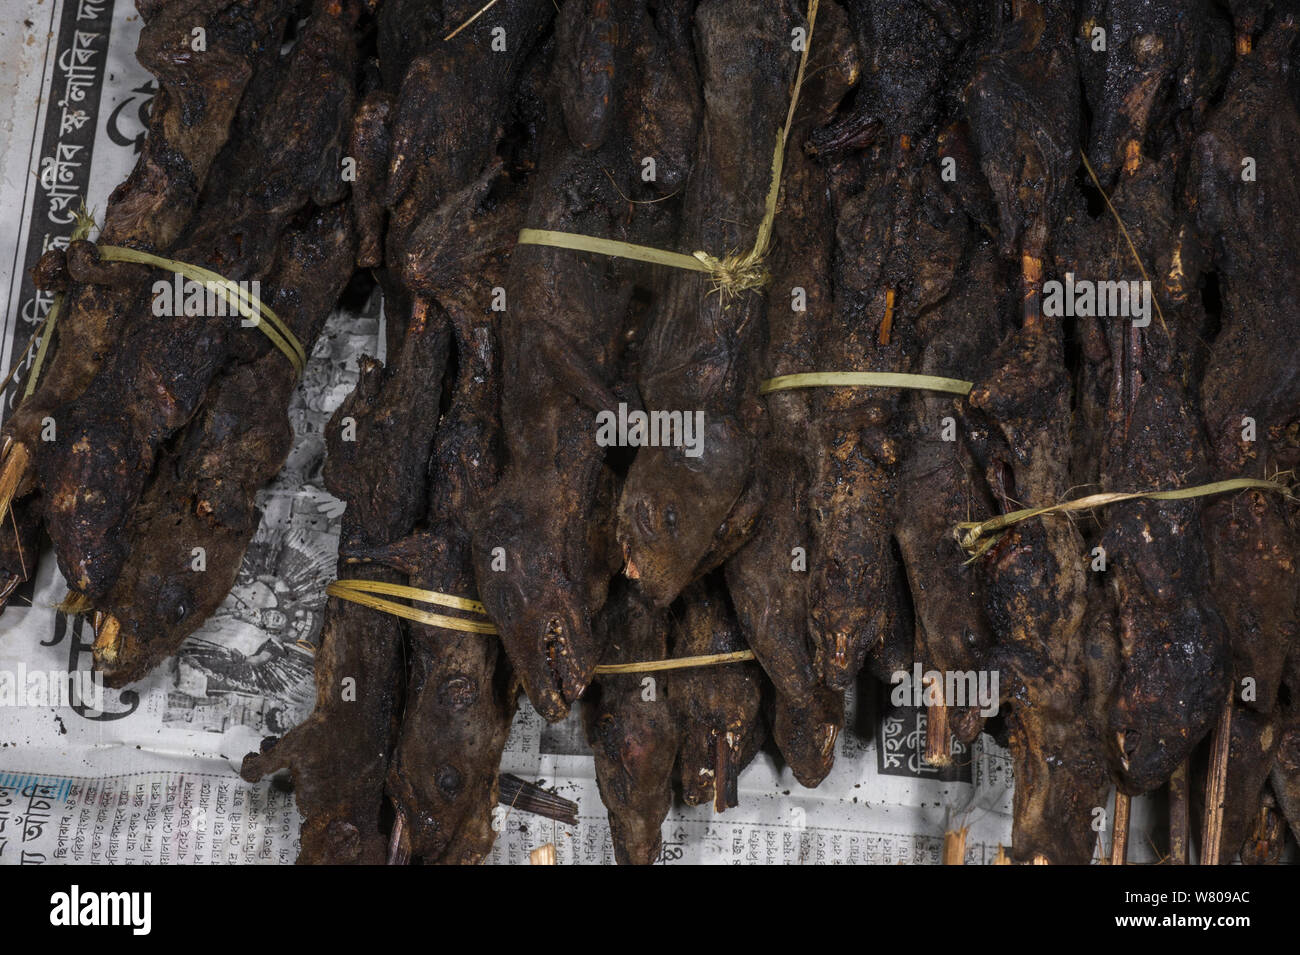 Smoked rats on skewers for sale in market for food.Apatani Tribe, Ziro Valley, Himalayan Foothills, Arunachal Pradesh, North East India, November 2014. Stock Photo